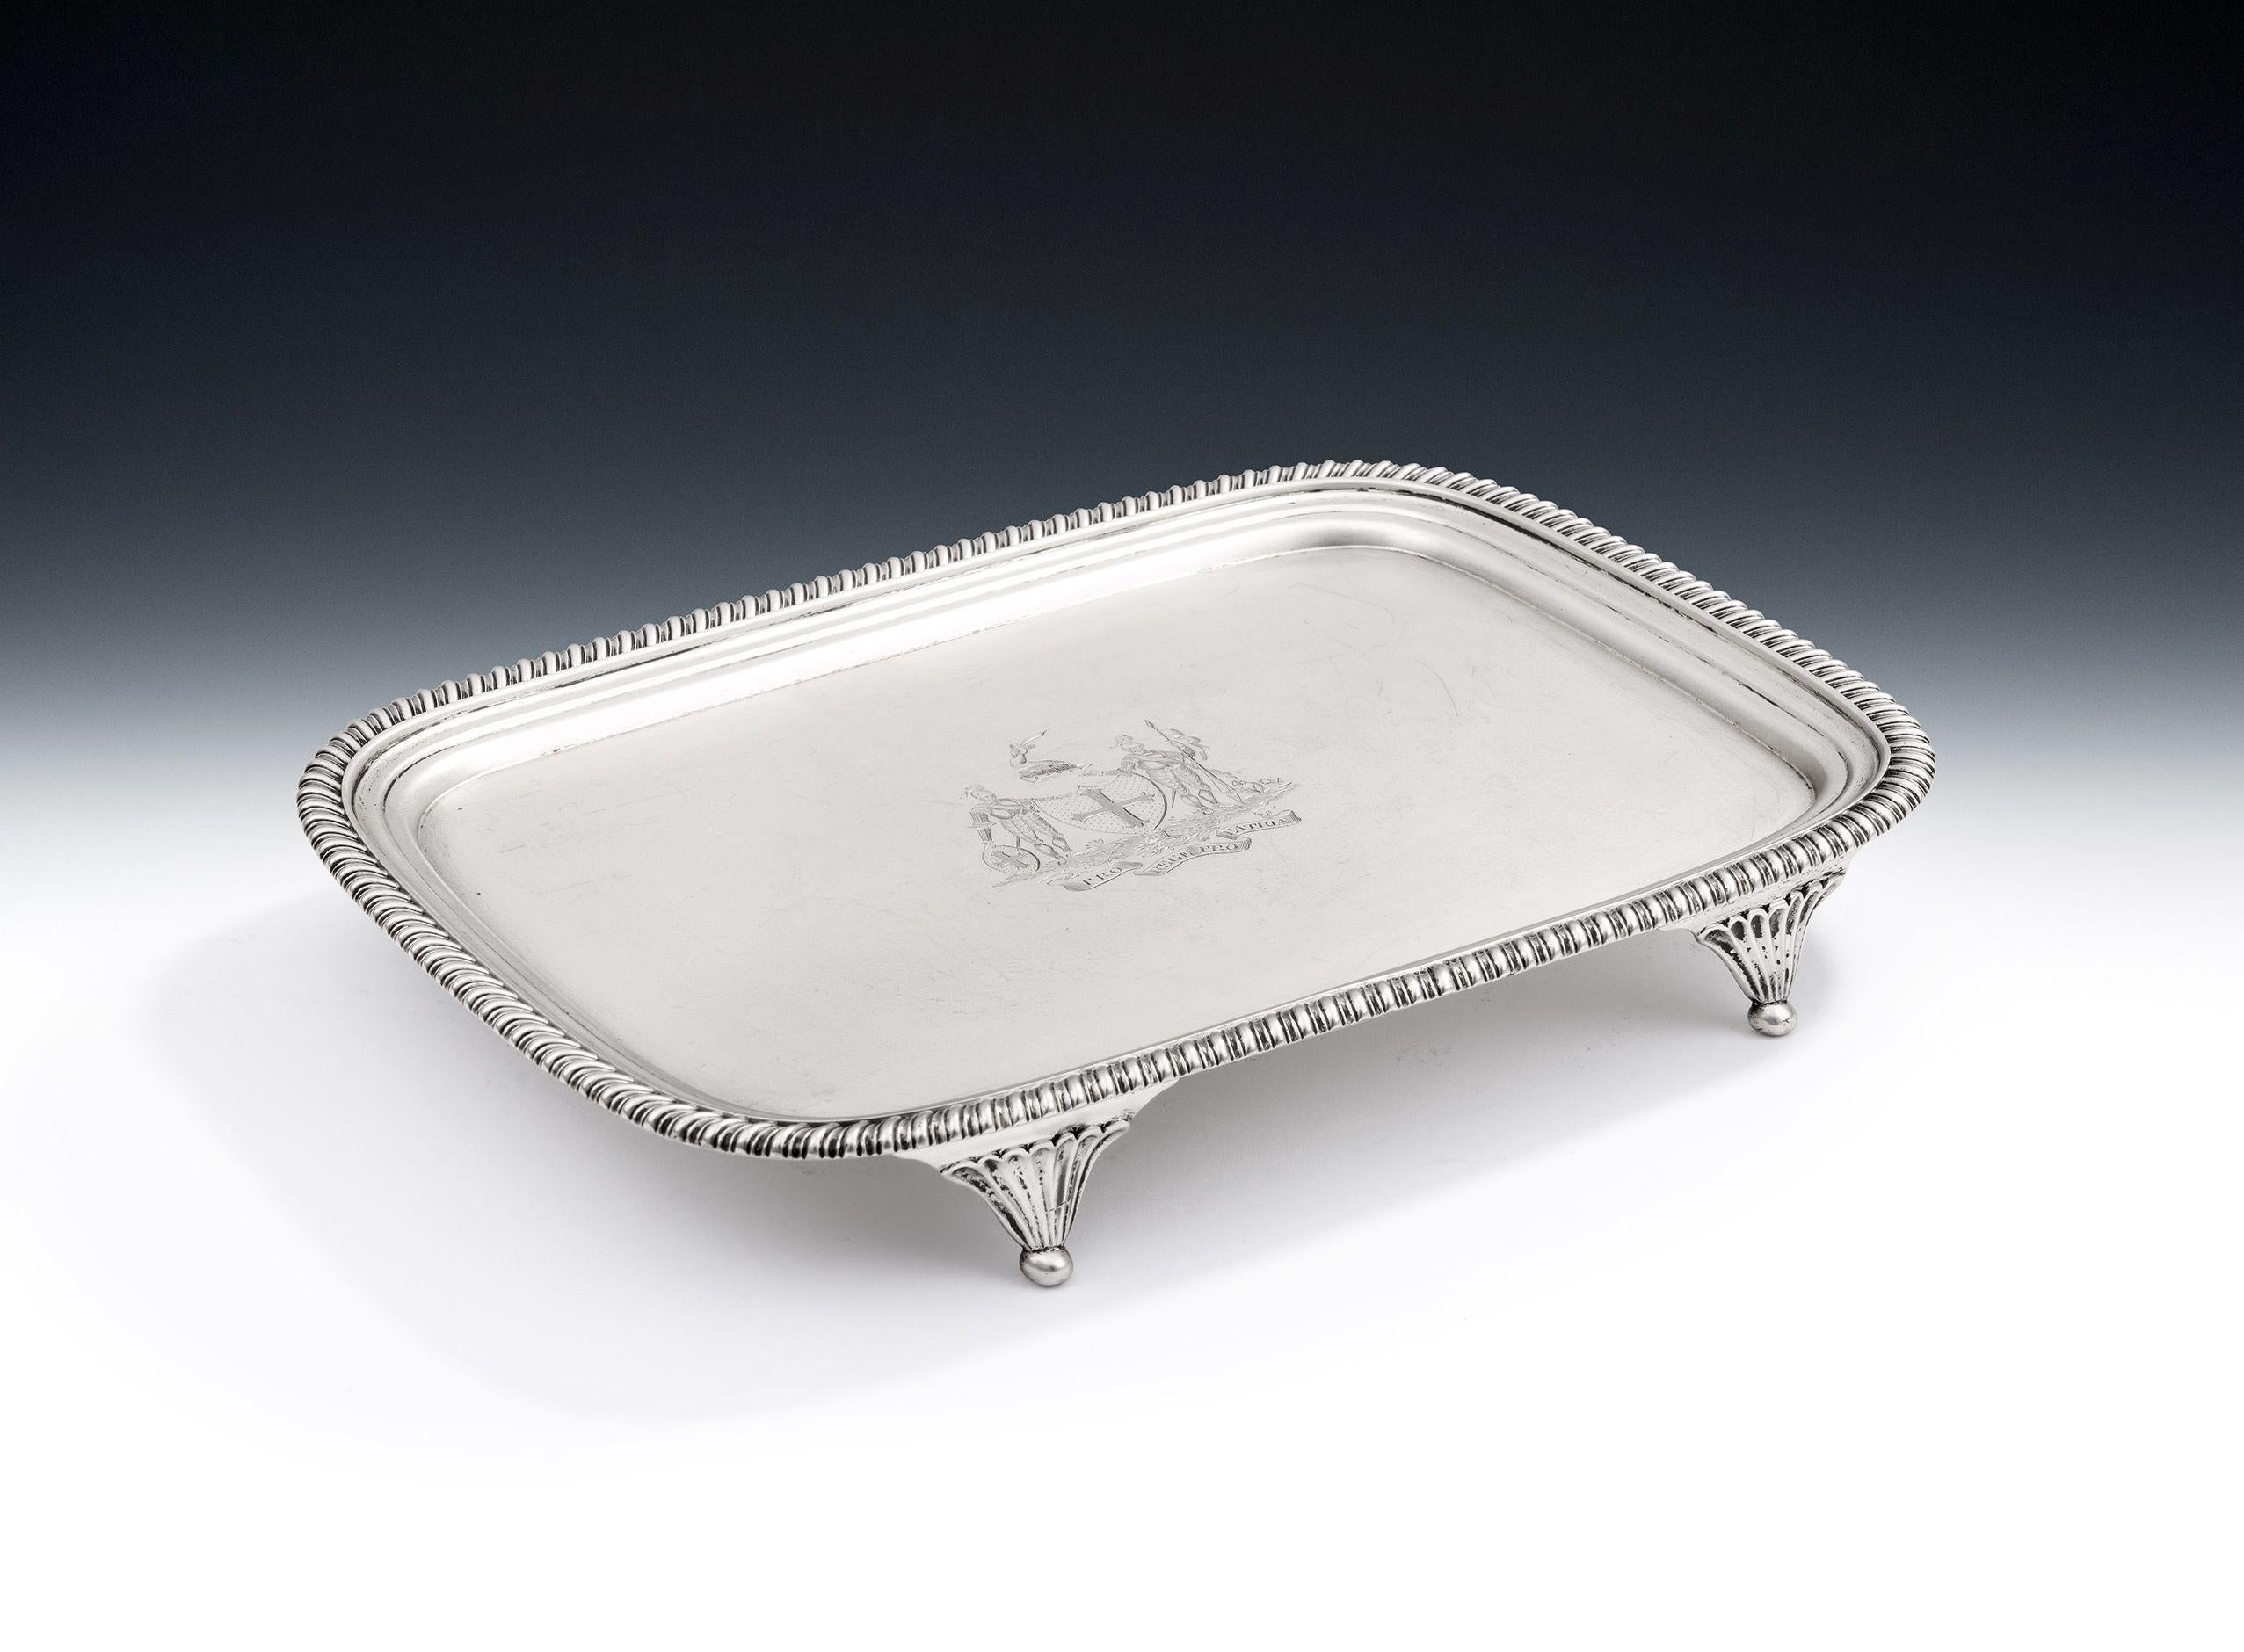 Silver George III Armorial Salver Made in London by William Bennett in 1812